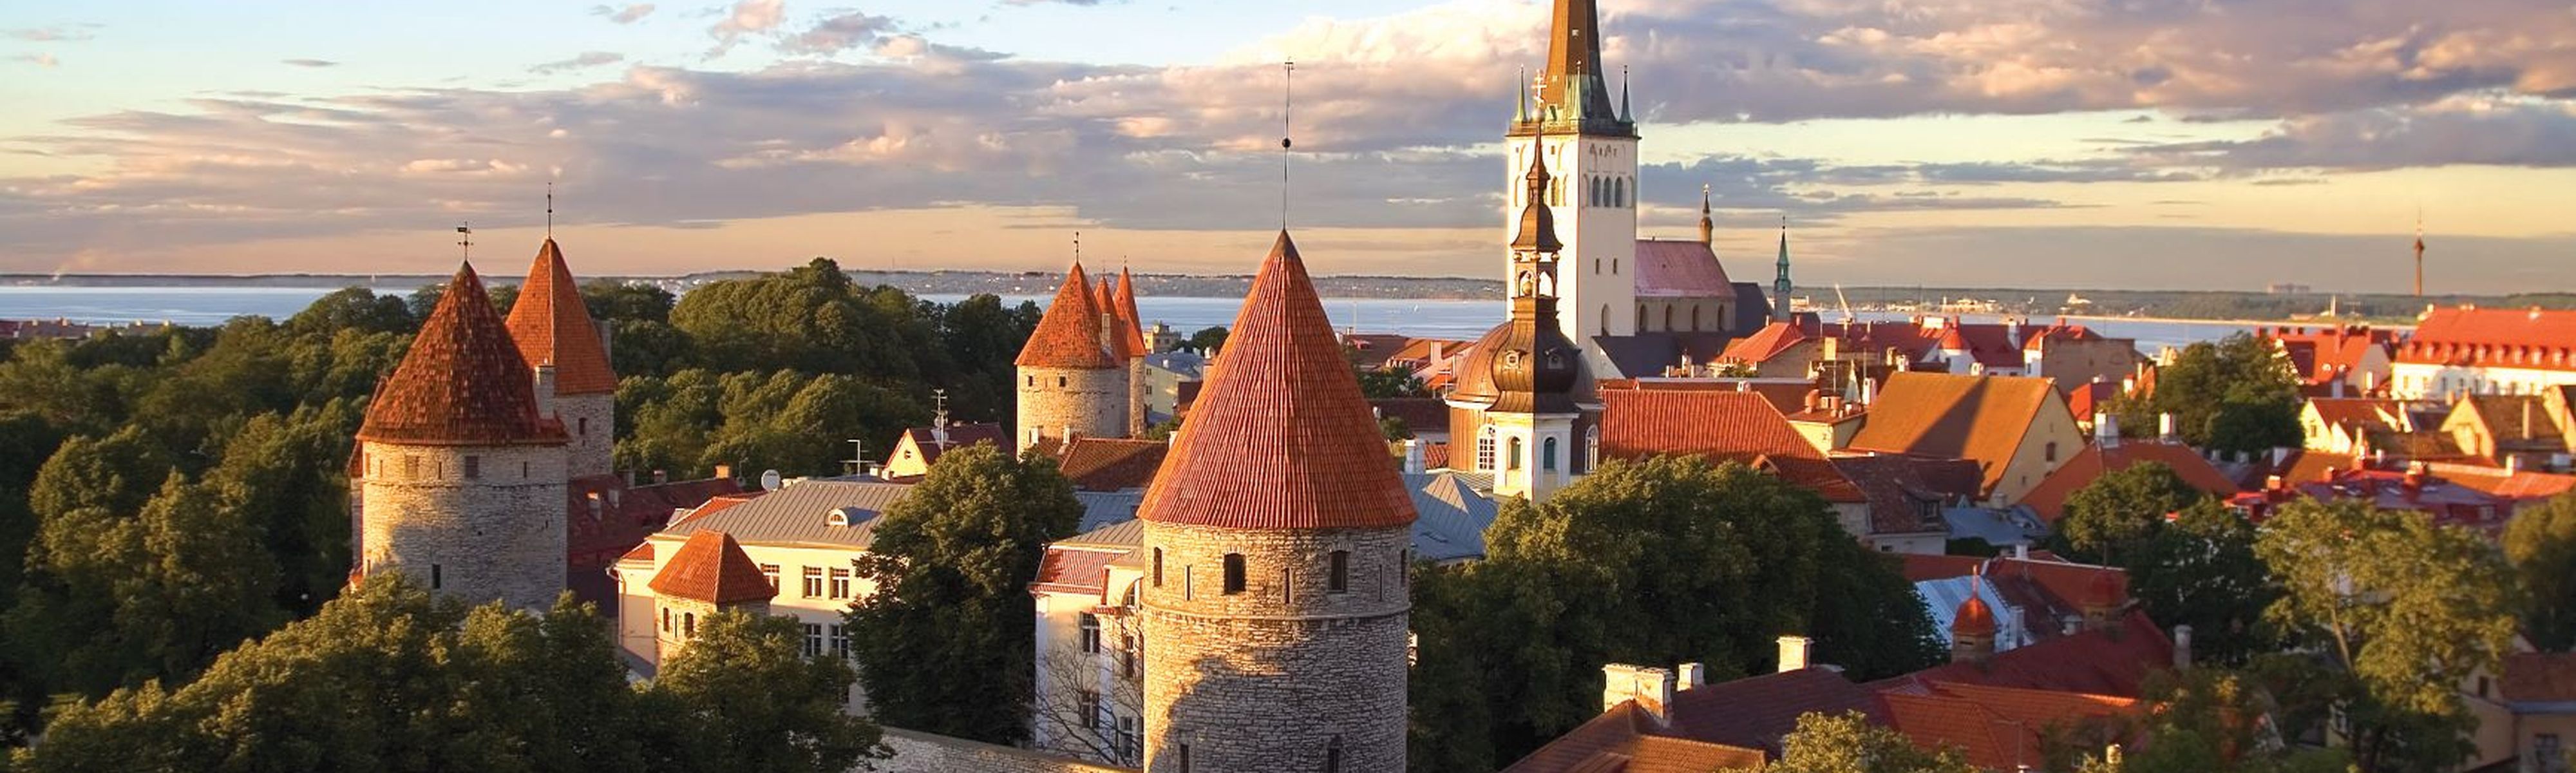 ancient cathedral surrounded by red roof buildings in tallinn estonia at sunset